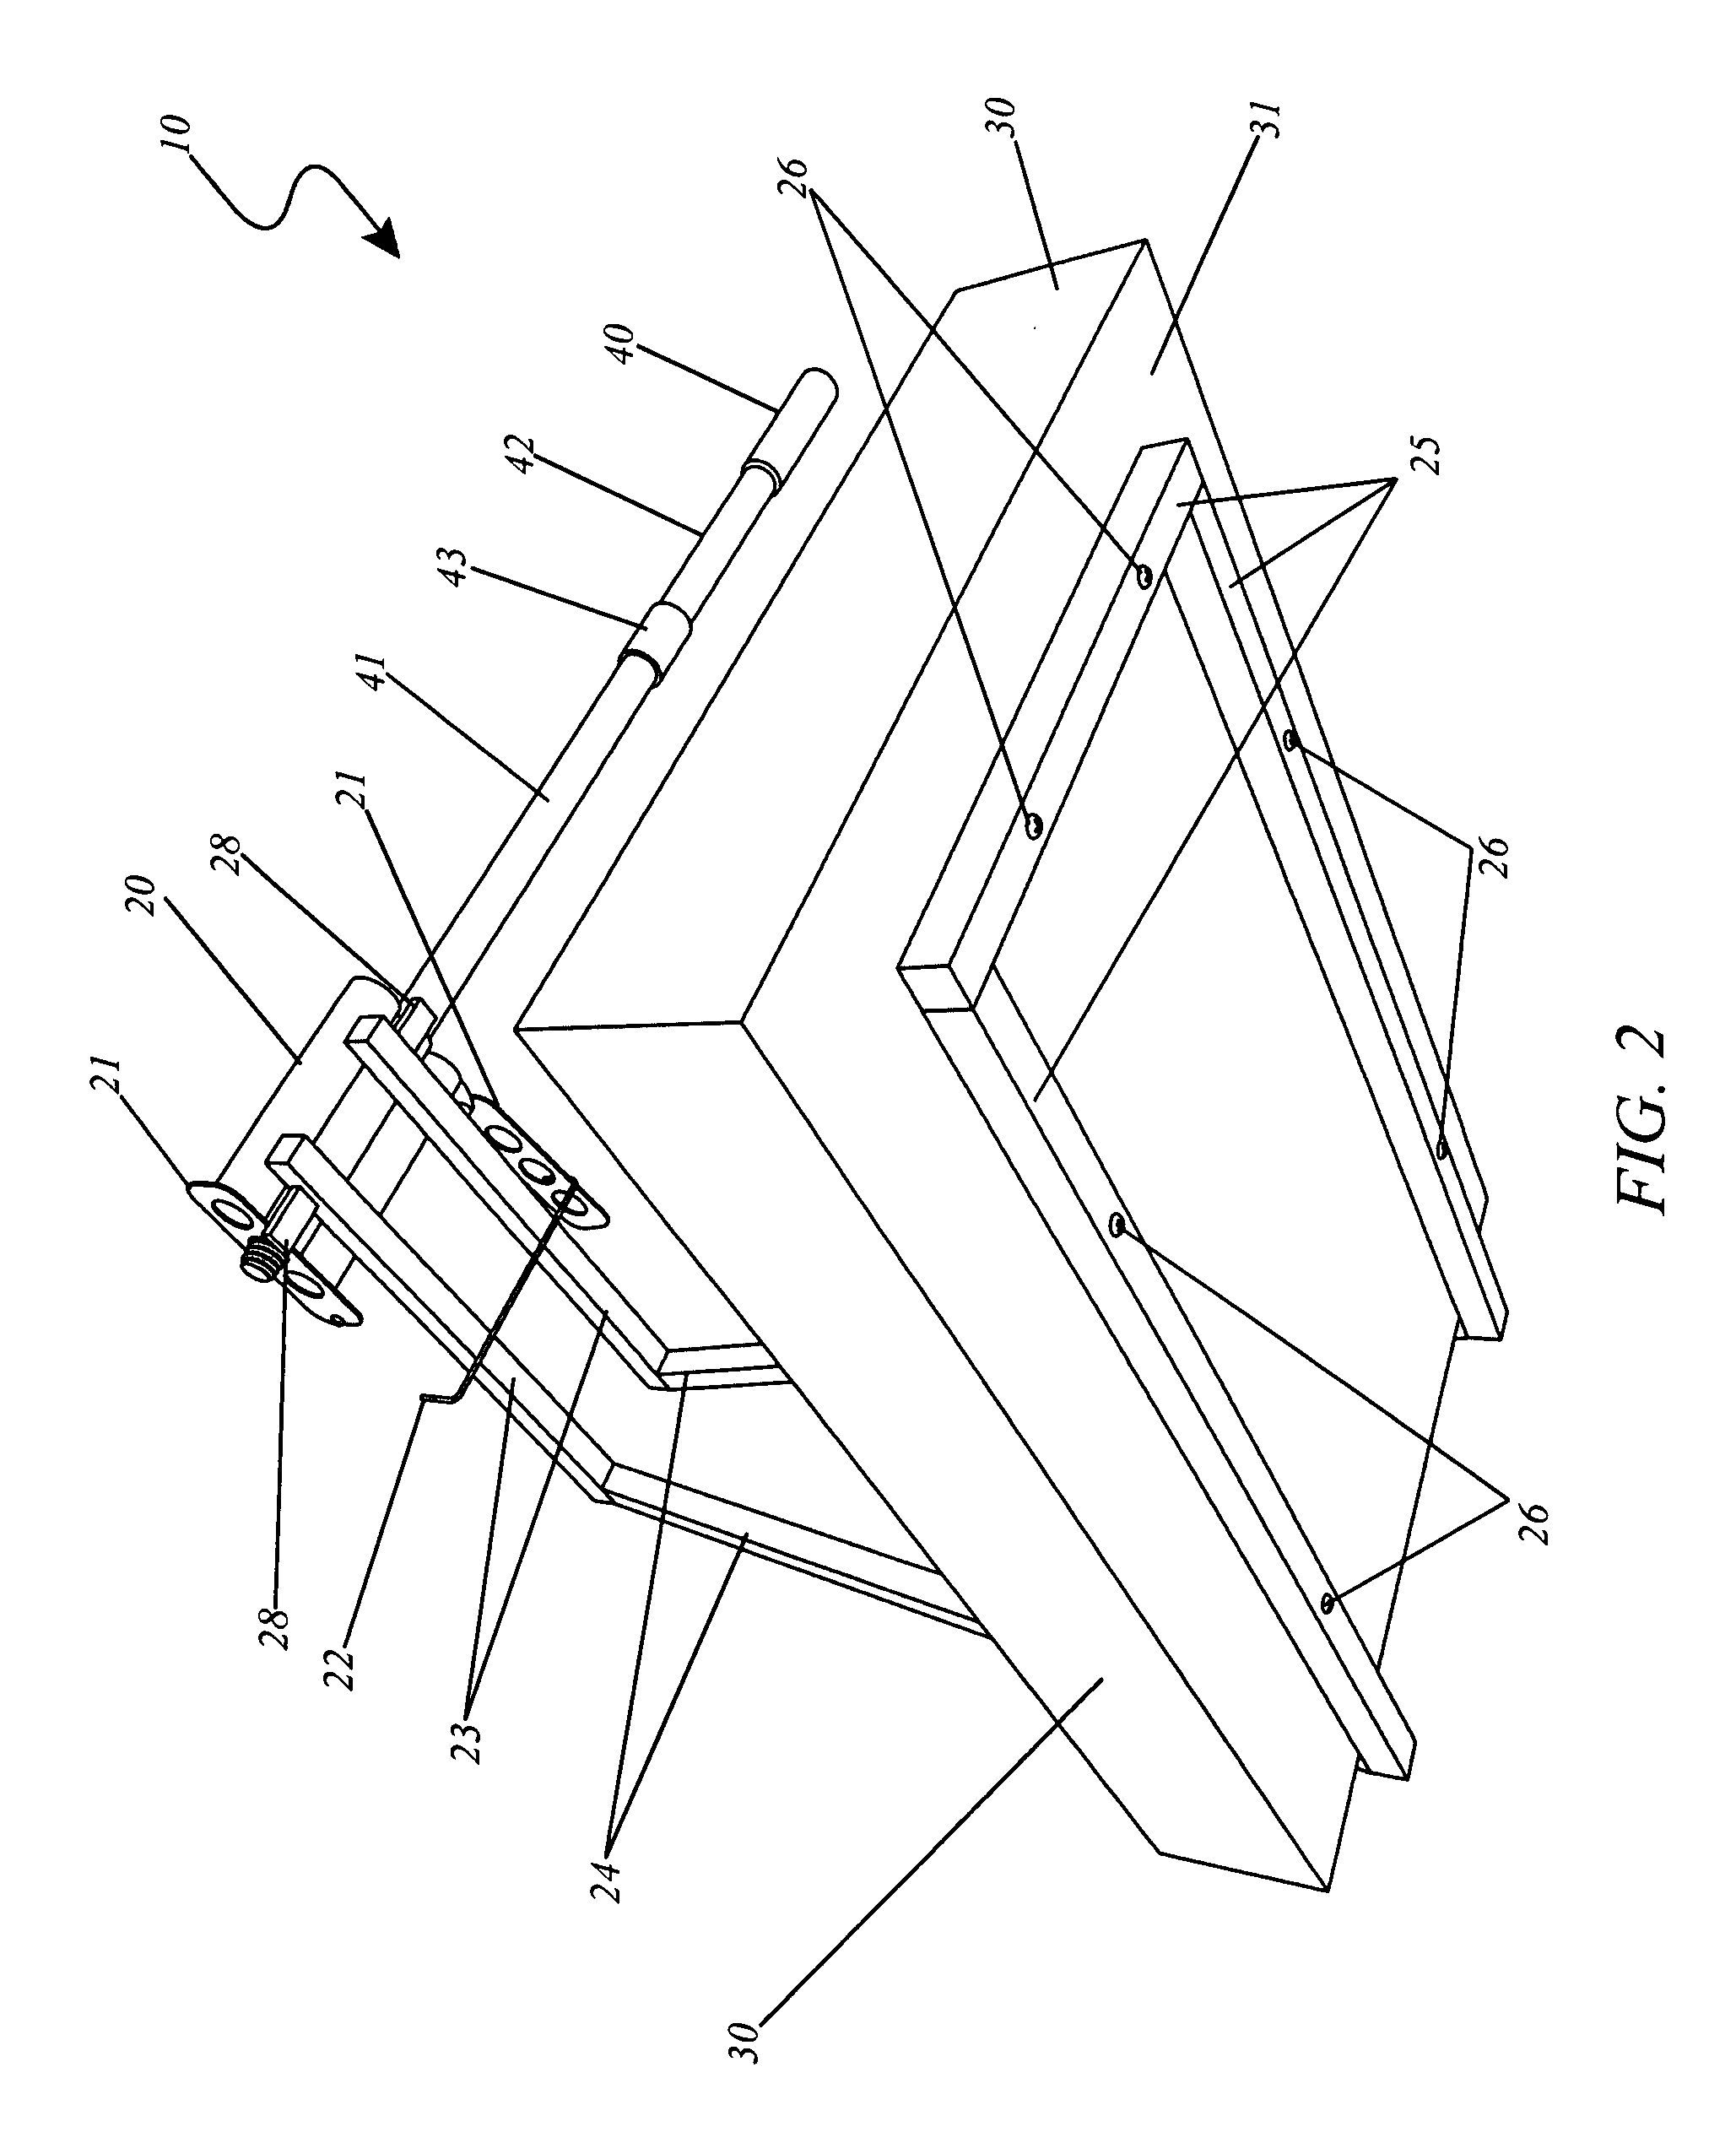 Paint tray caddy for extension ladders and method of use thereof